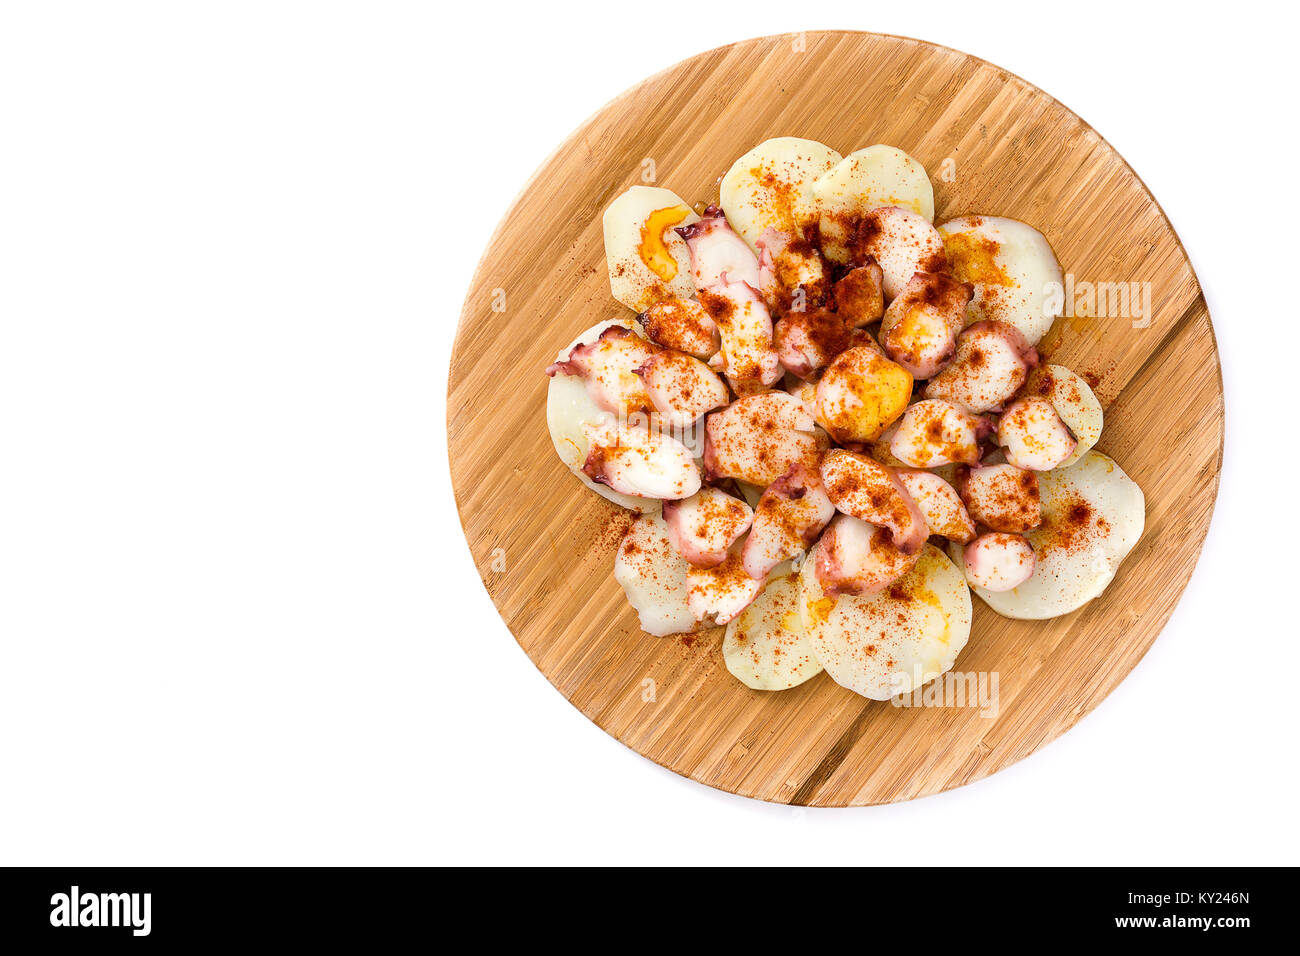 Pulpo a la gallega. Galician octopus on wood. Typical spanish food isolated on white background Stock Photo